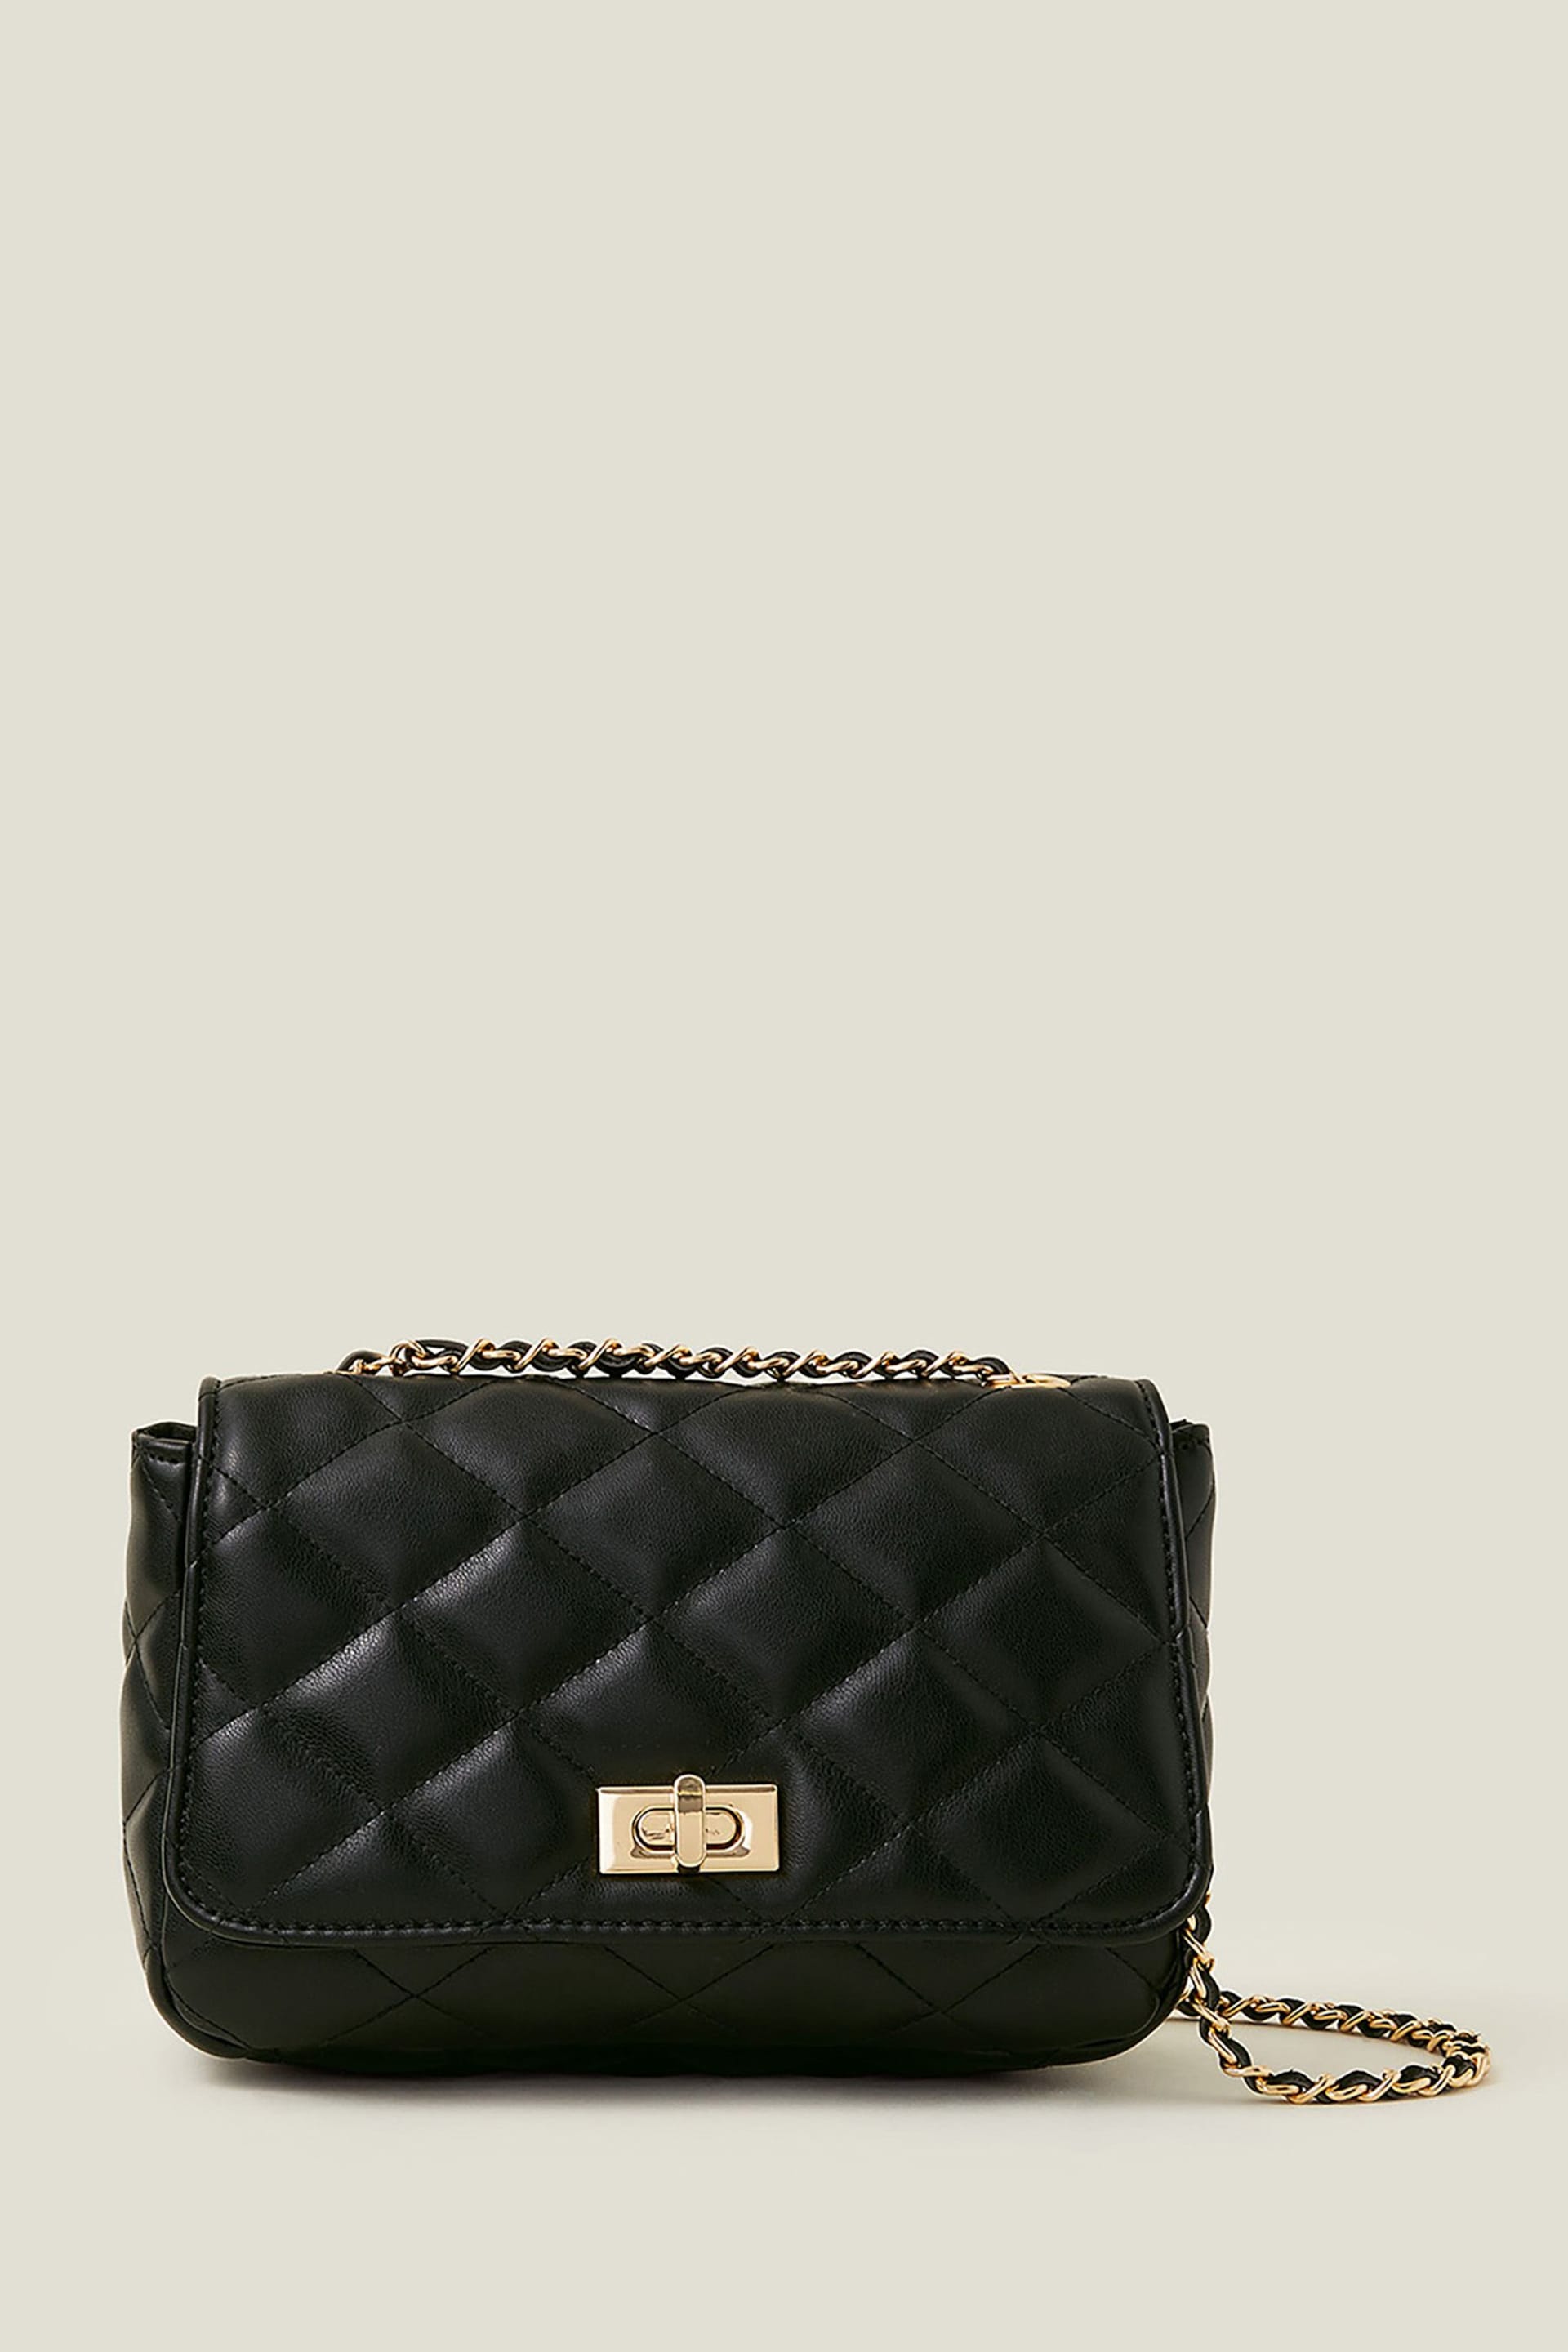 Accessorize Black Quilted Cross-Body Bag - Image 2 of 4